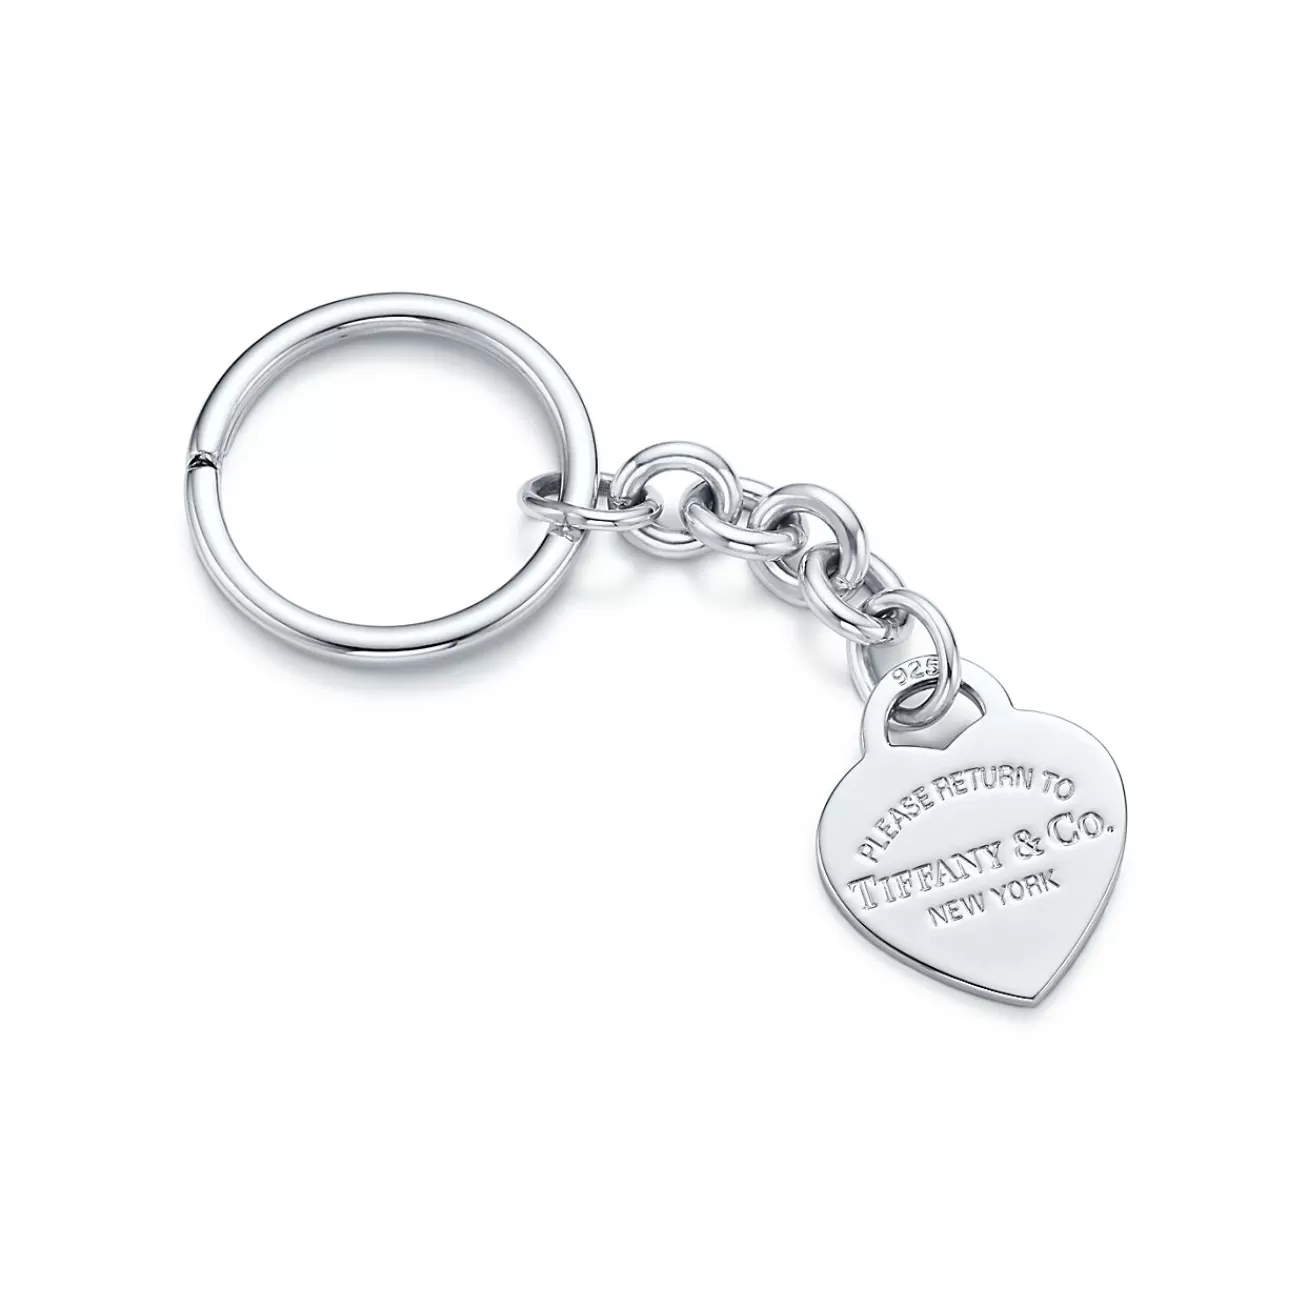 Tiffany & Co. Return to Tiffany® heart tag key ring in sterling silver. | ^Women Gifts to Personalize | Key Rings